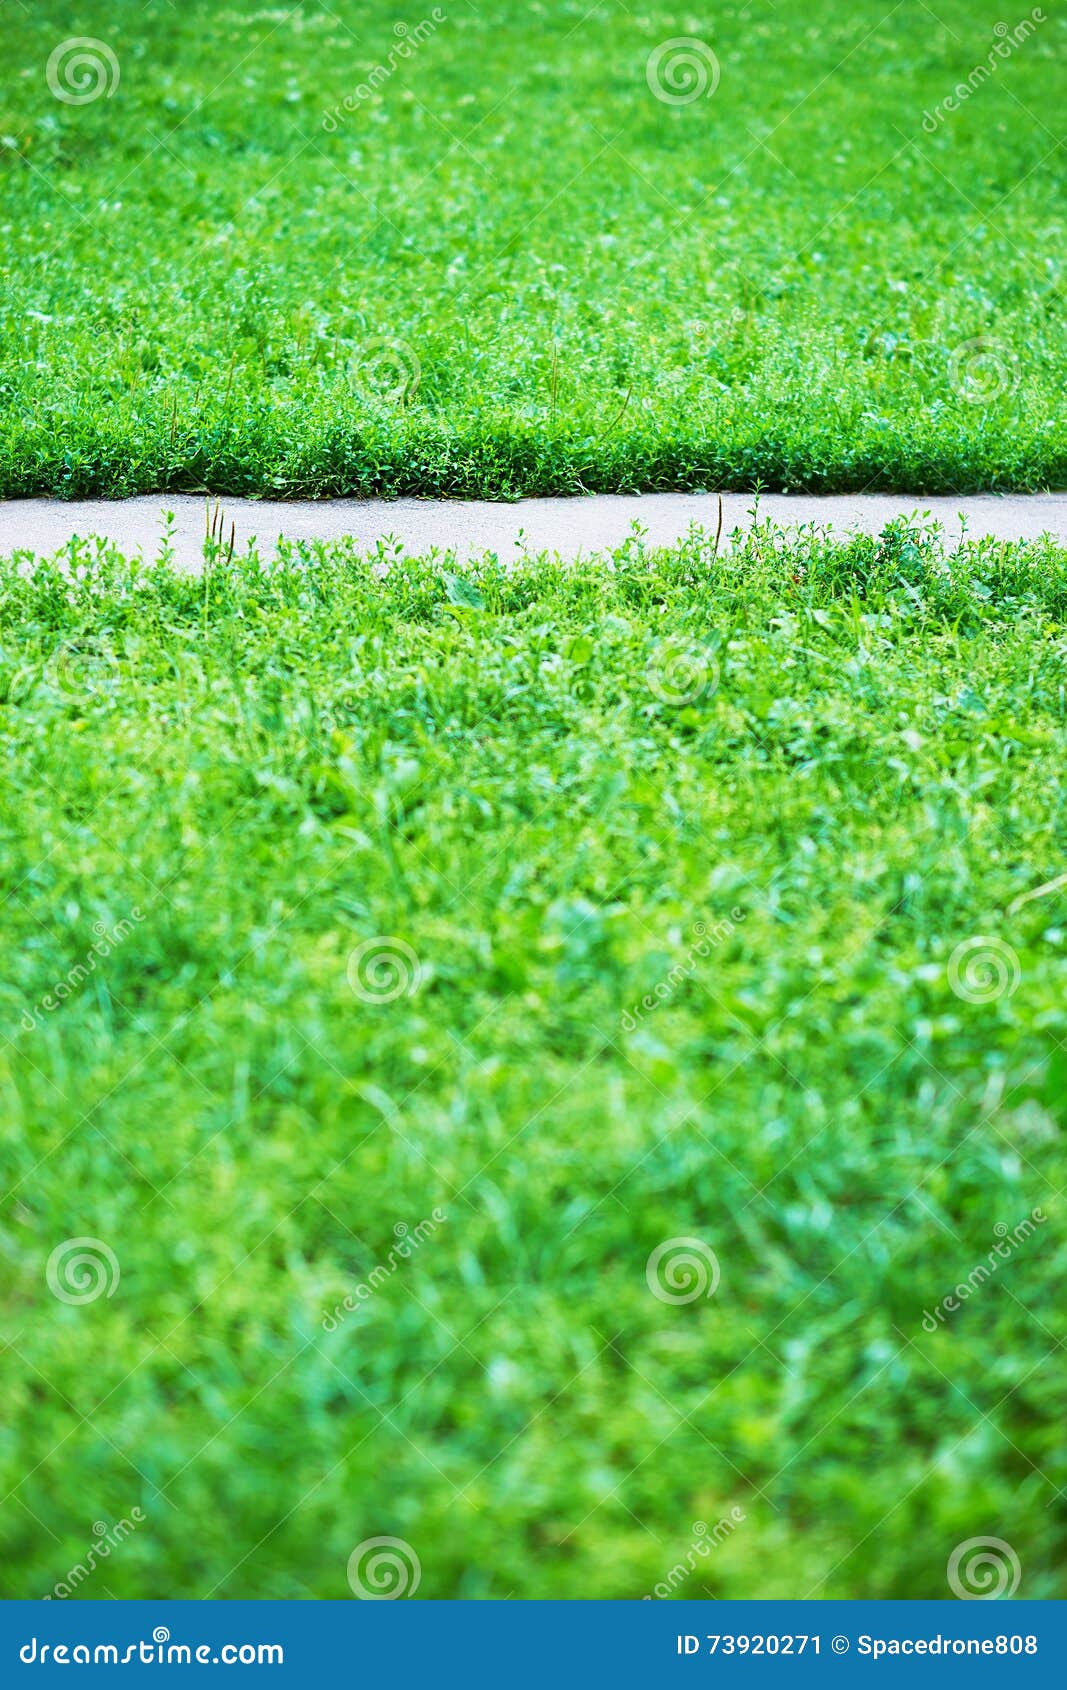 Vertical Park Path With Green Grass Background Stock Image Image